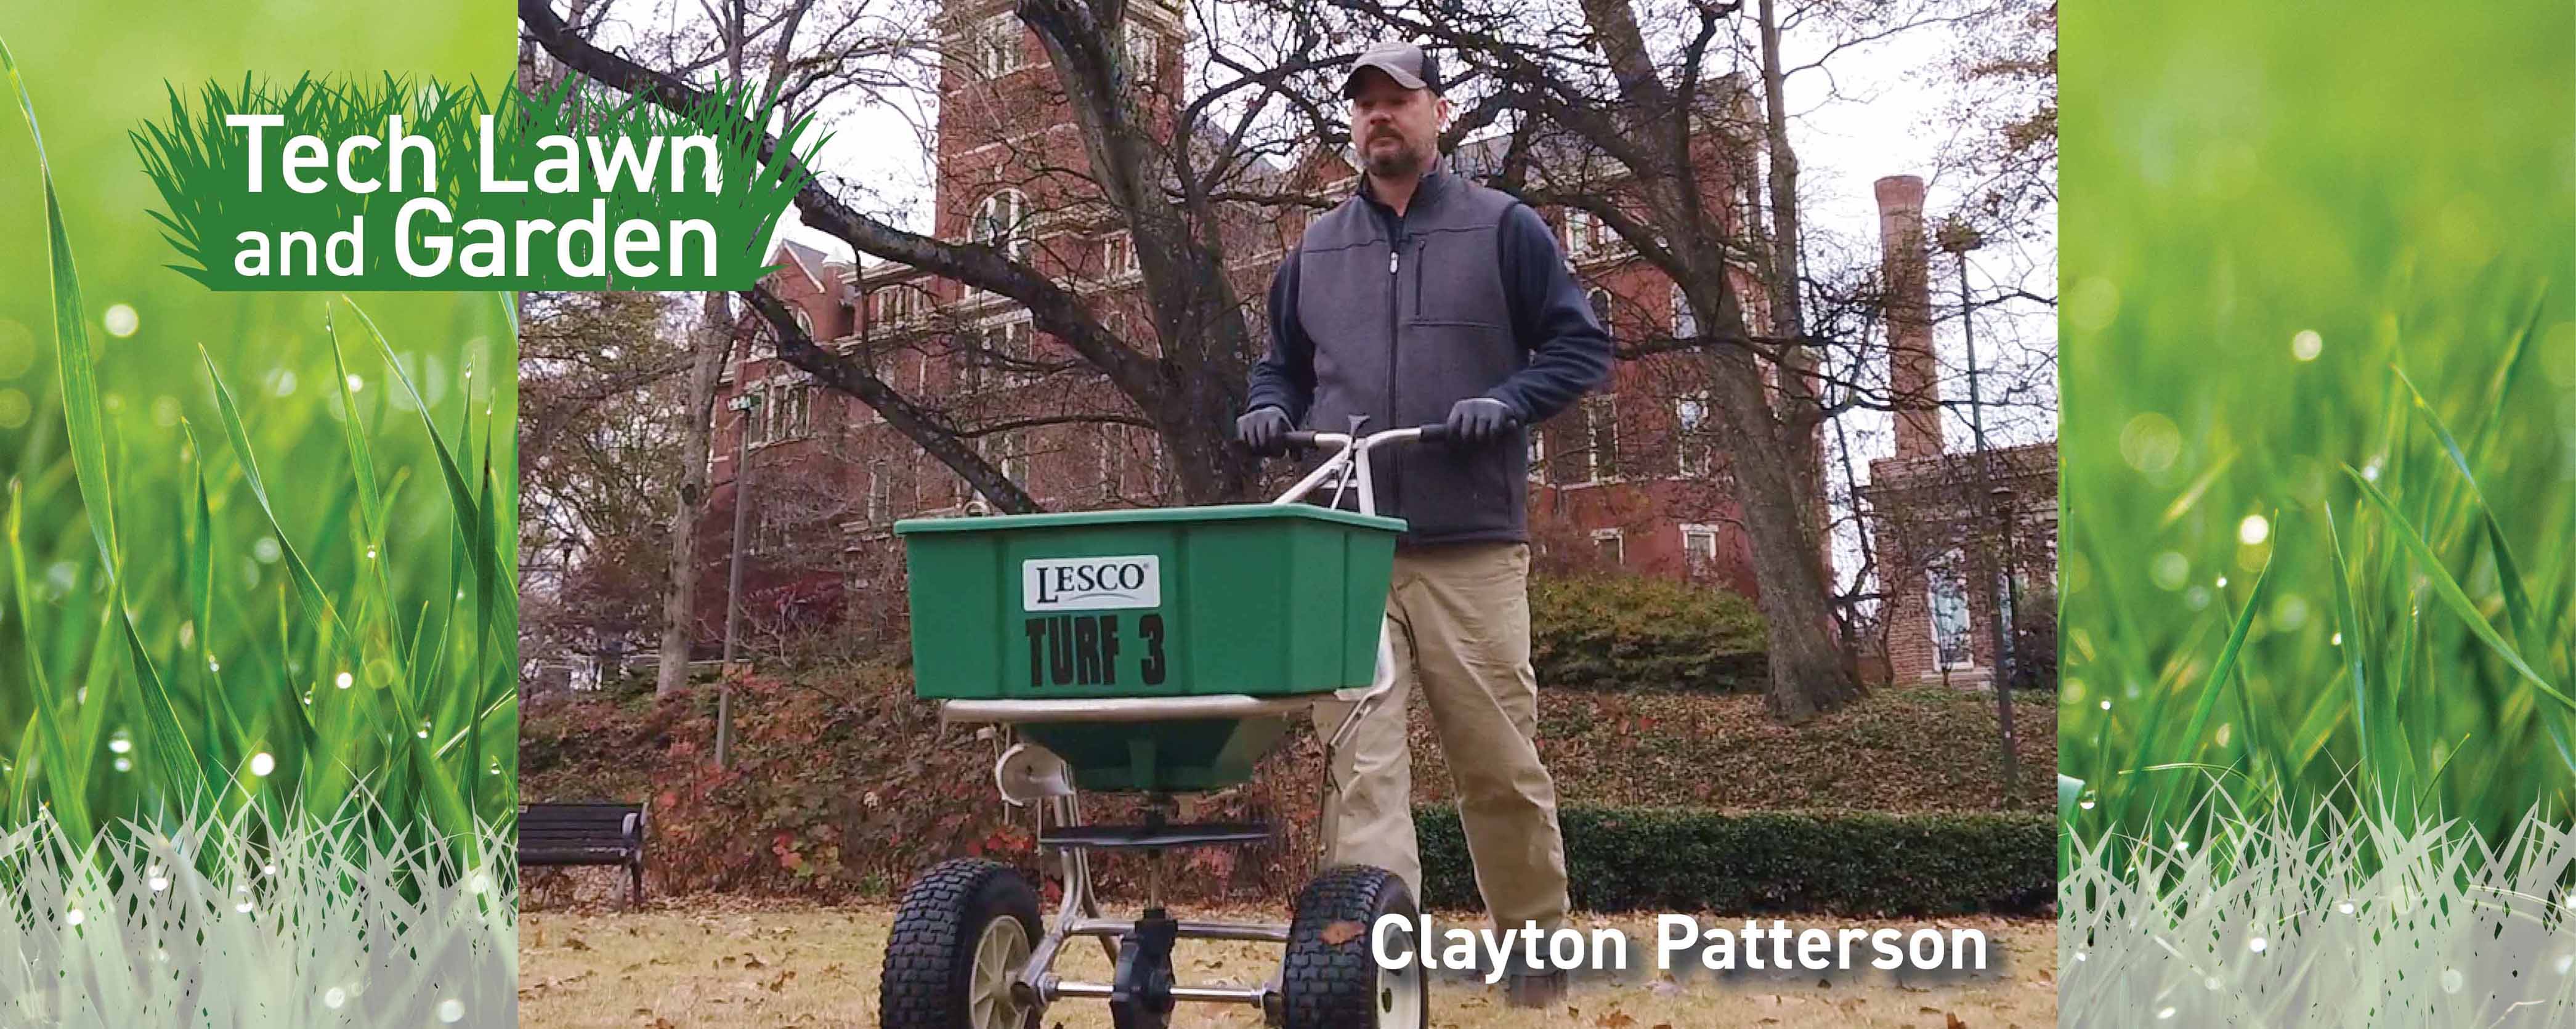 Clayton Patterson, turf maintenance manager, lawn and garden expert in Facilities